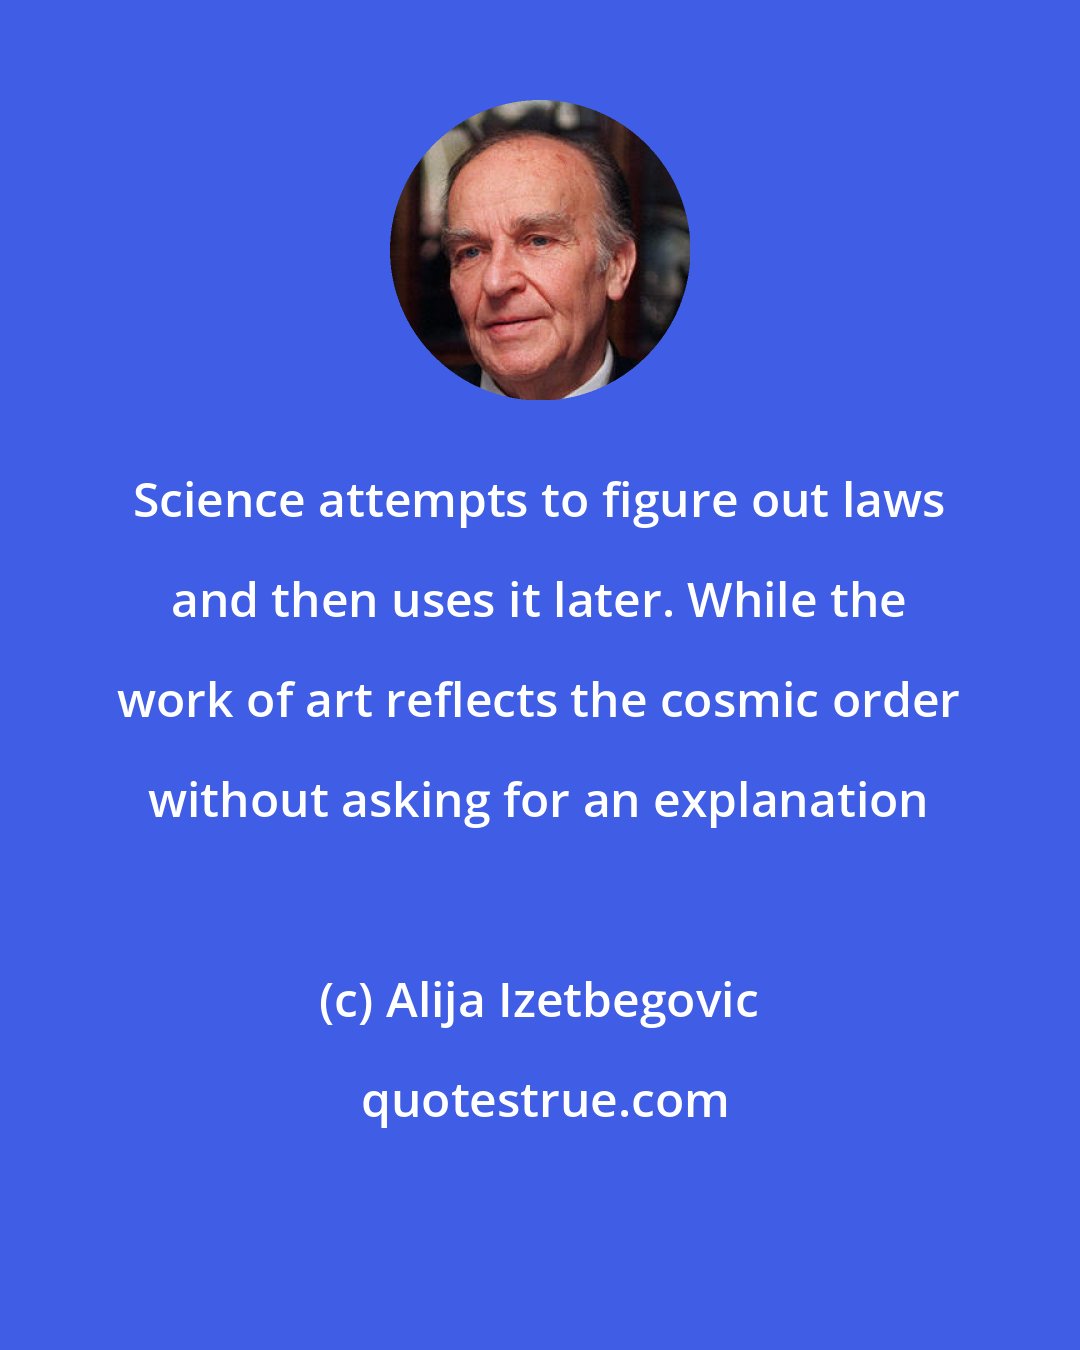 Alija Izetbegovic: Science attempts to figure out laws and then uses it later. While the work of art reflects the cosmic order without asking for an explanation